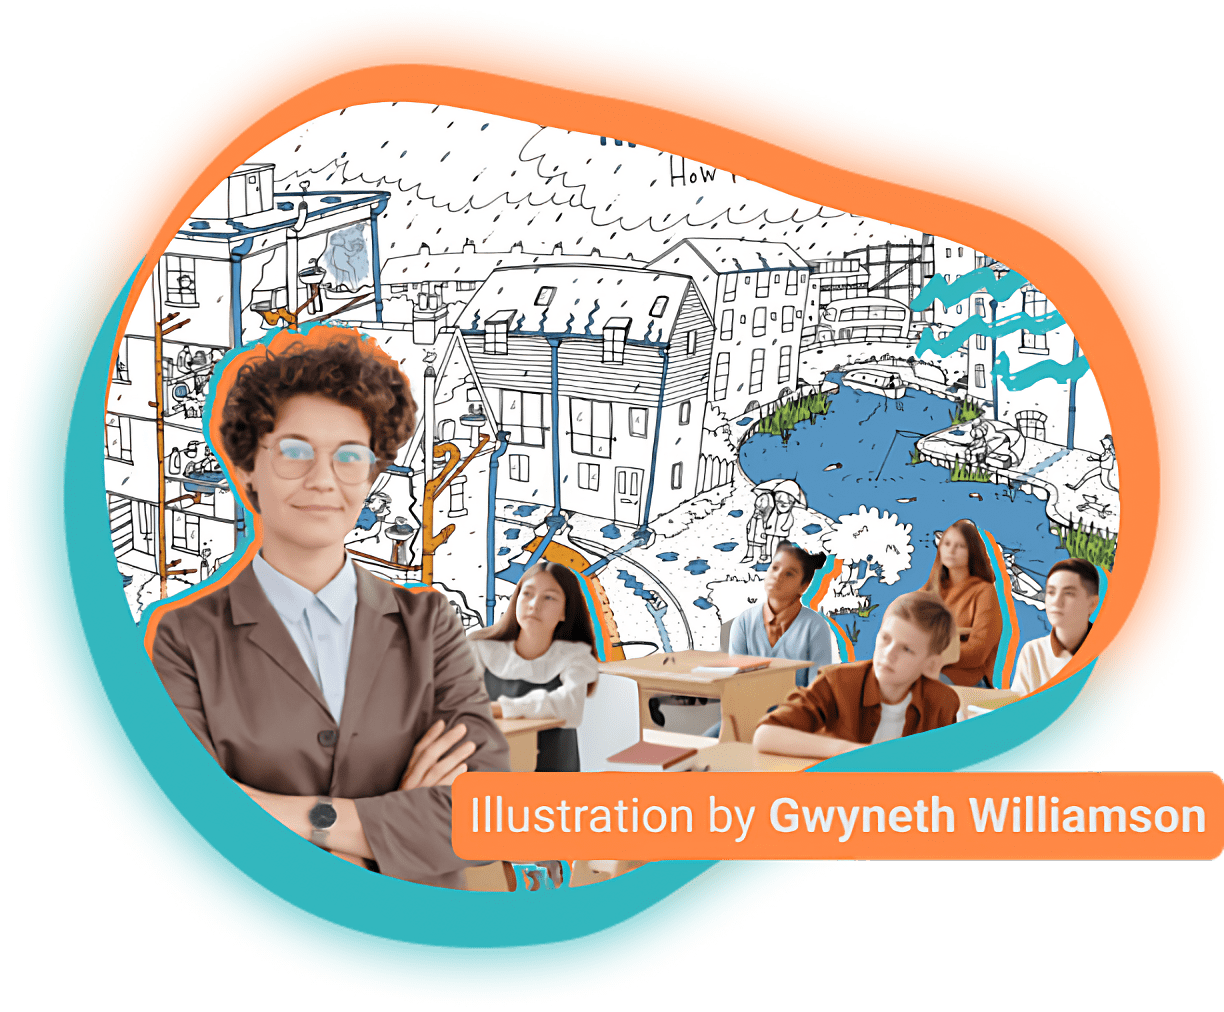 Teacher standing in front of the class. Background illustration of the urban water cycle by Gwyneth Williamson